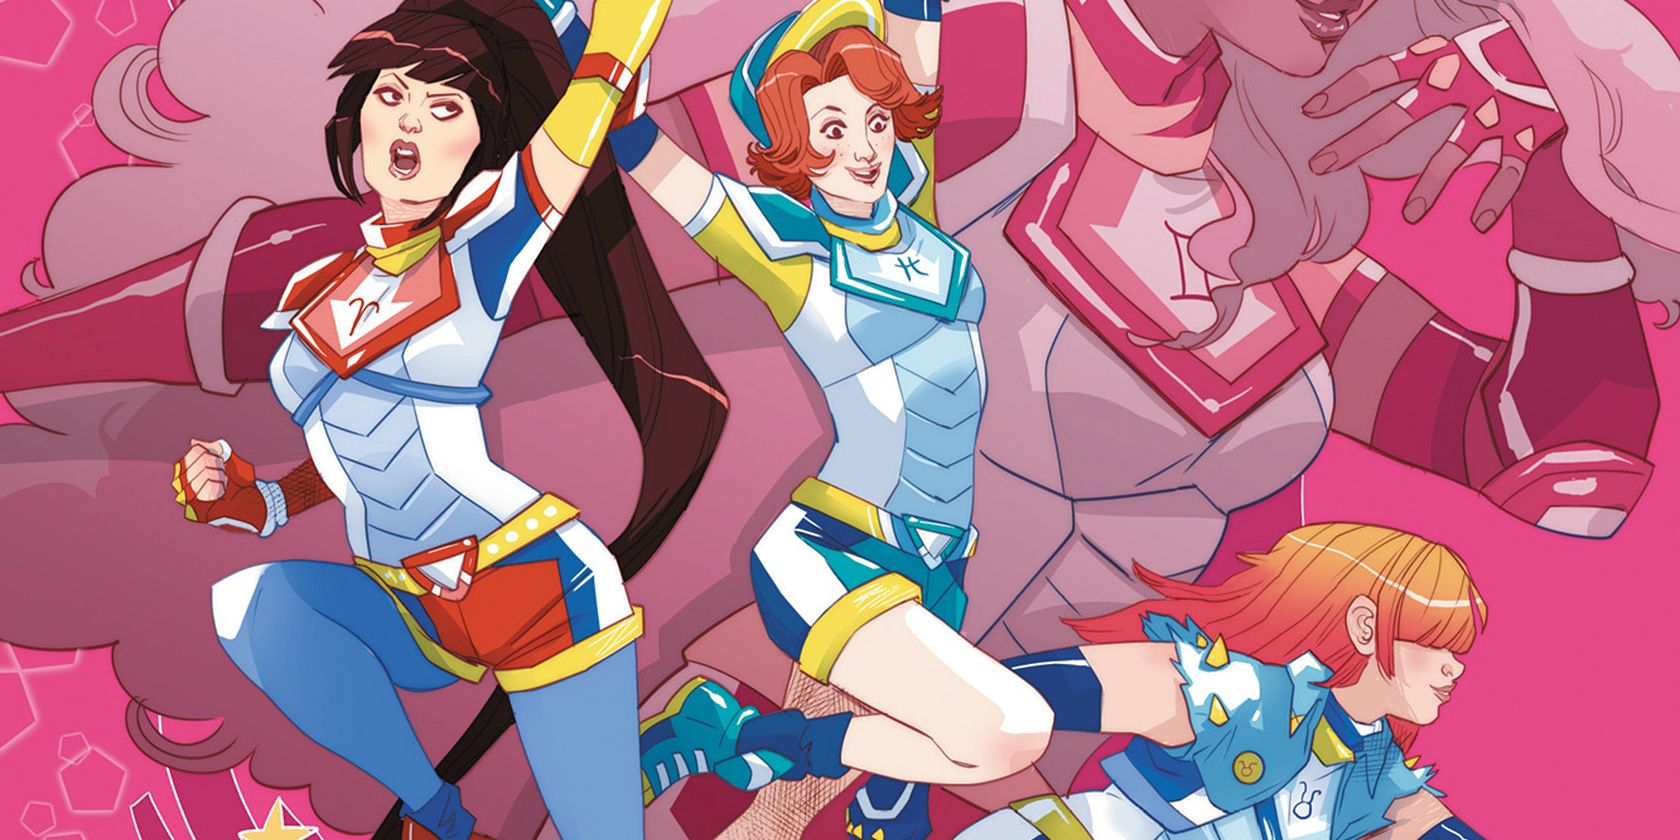 characters of Zodiac Starforce posing together